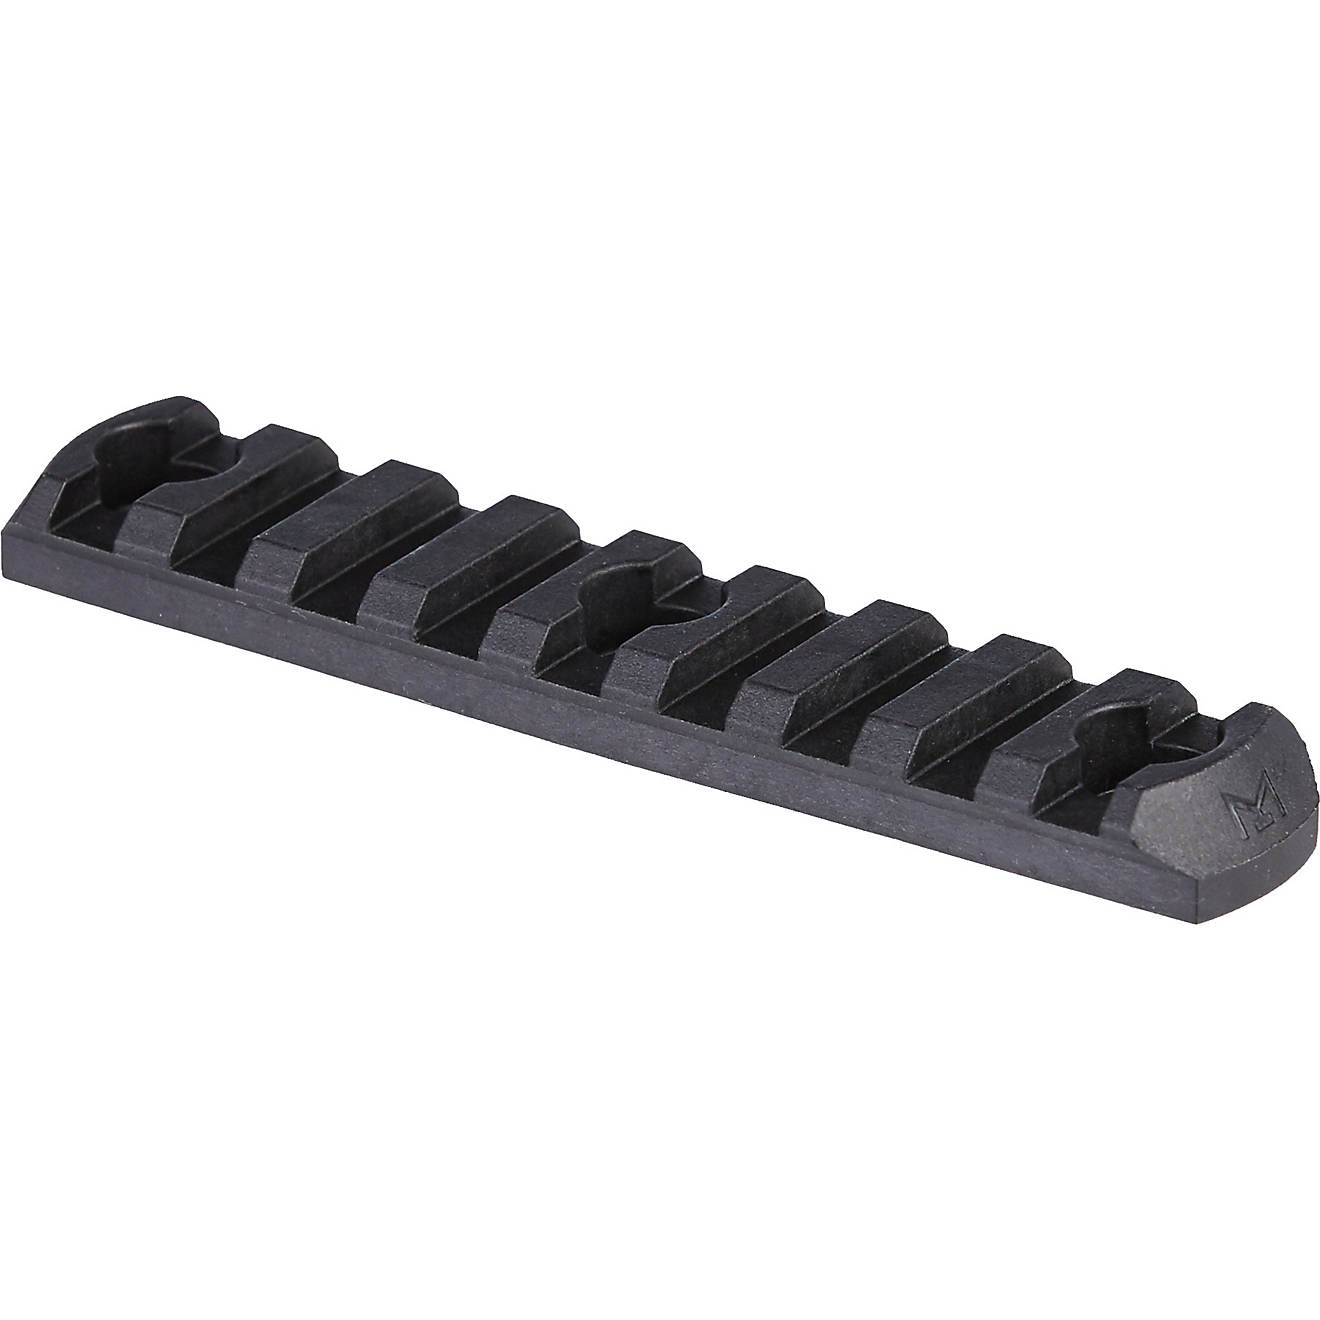 Magpul MAG589 Polymer Rail for sale online 